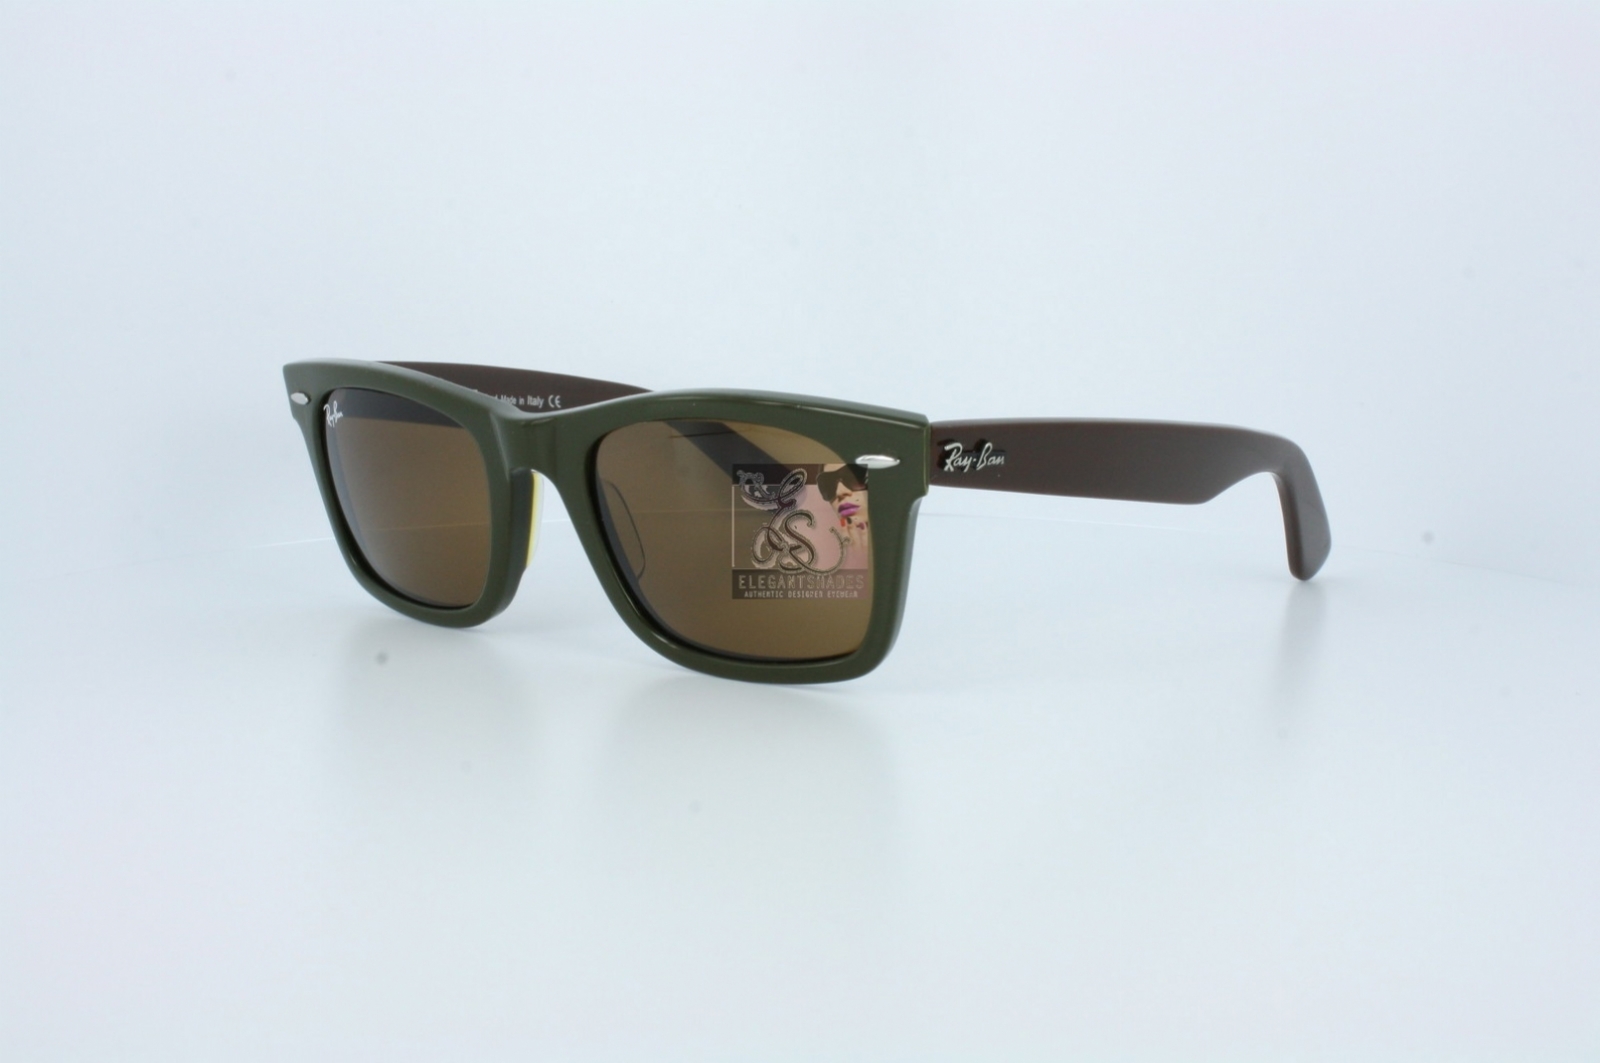  crystal green/camo green brown temples